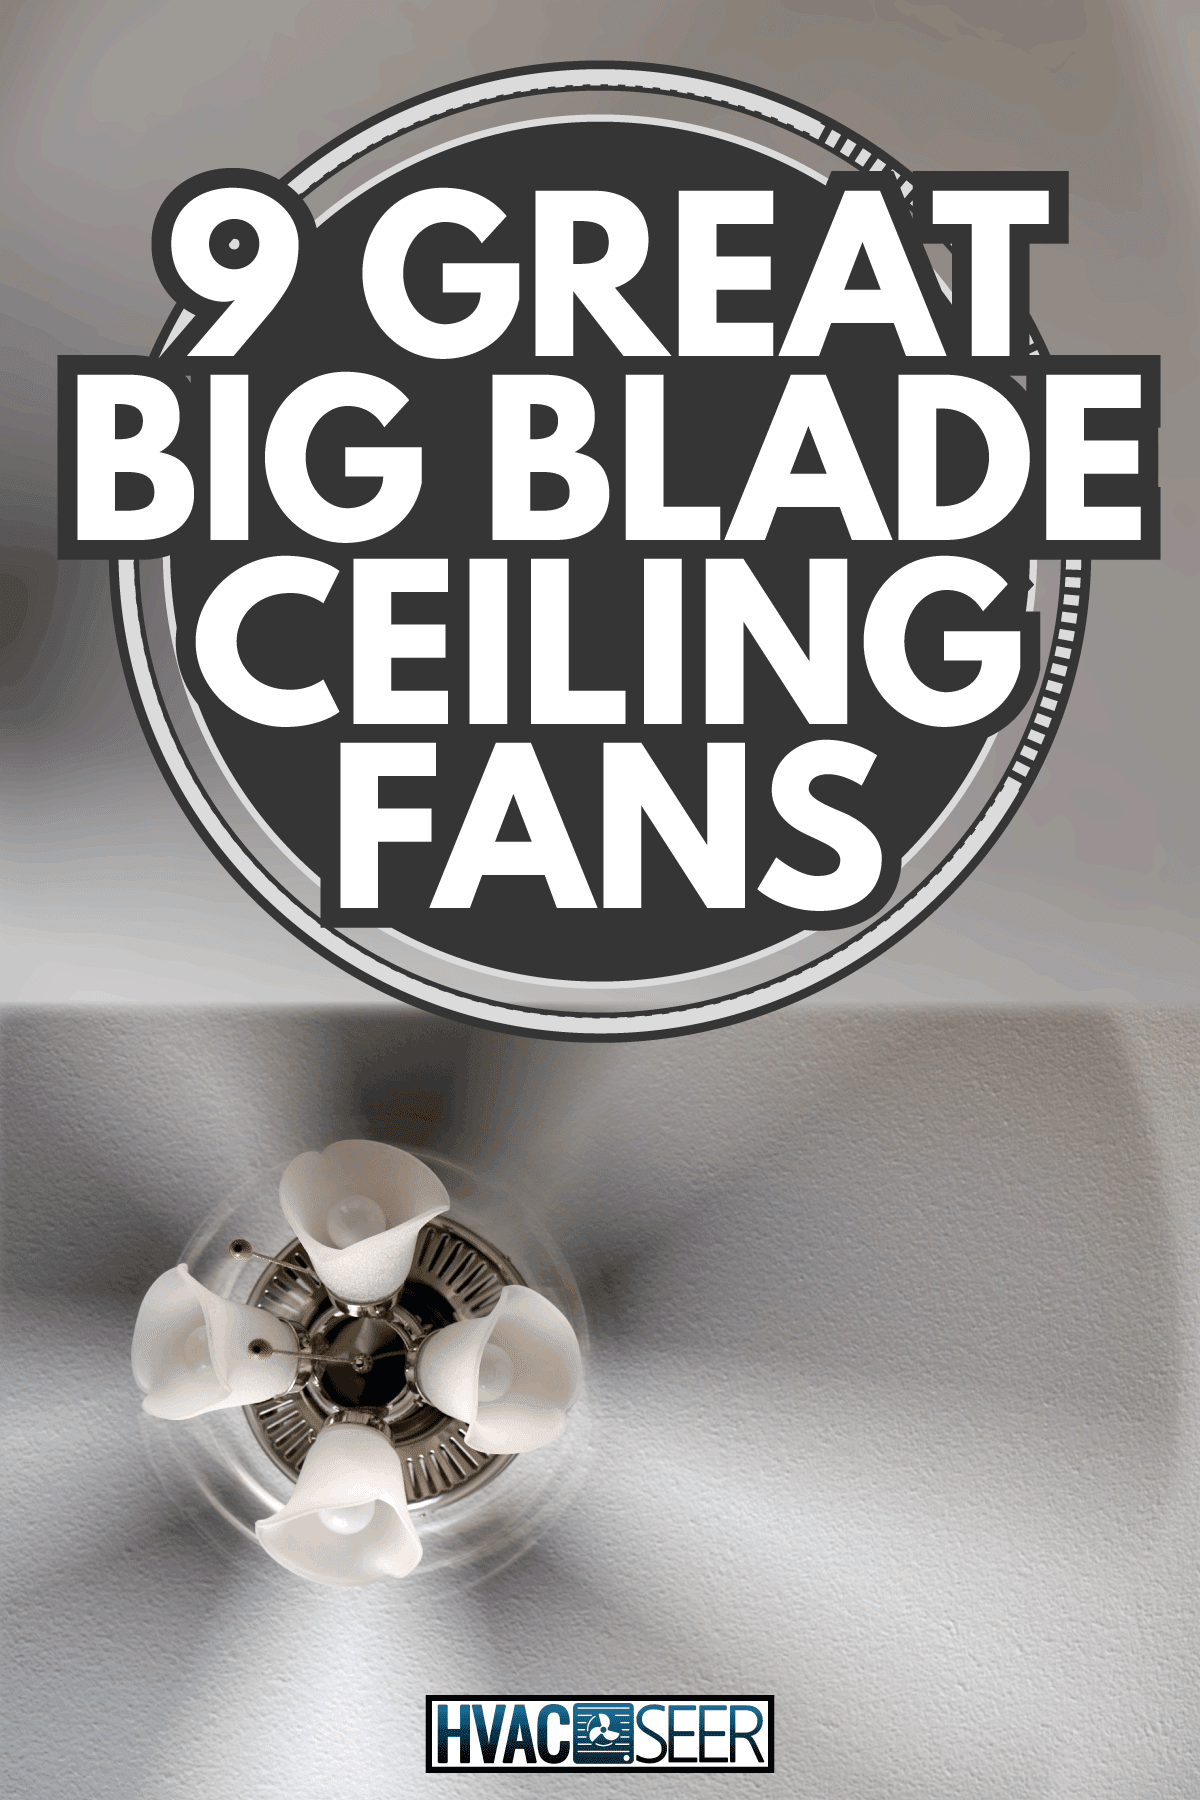 spinning ceiling fan blade with small chandelier, motion blur. 9 Great Big Blade Ceiling Fans